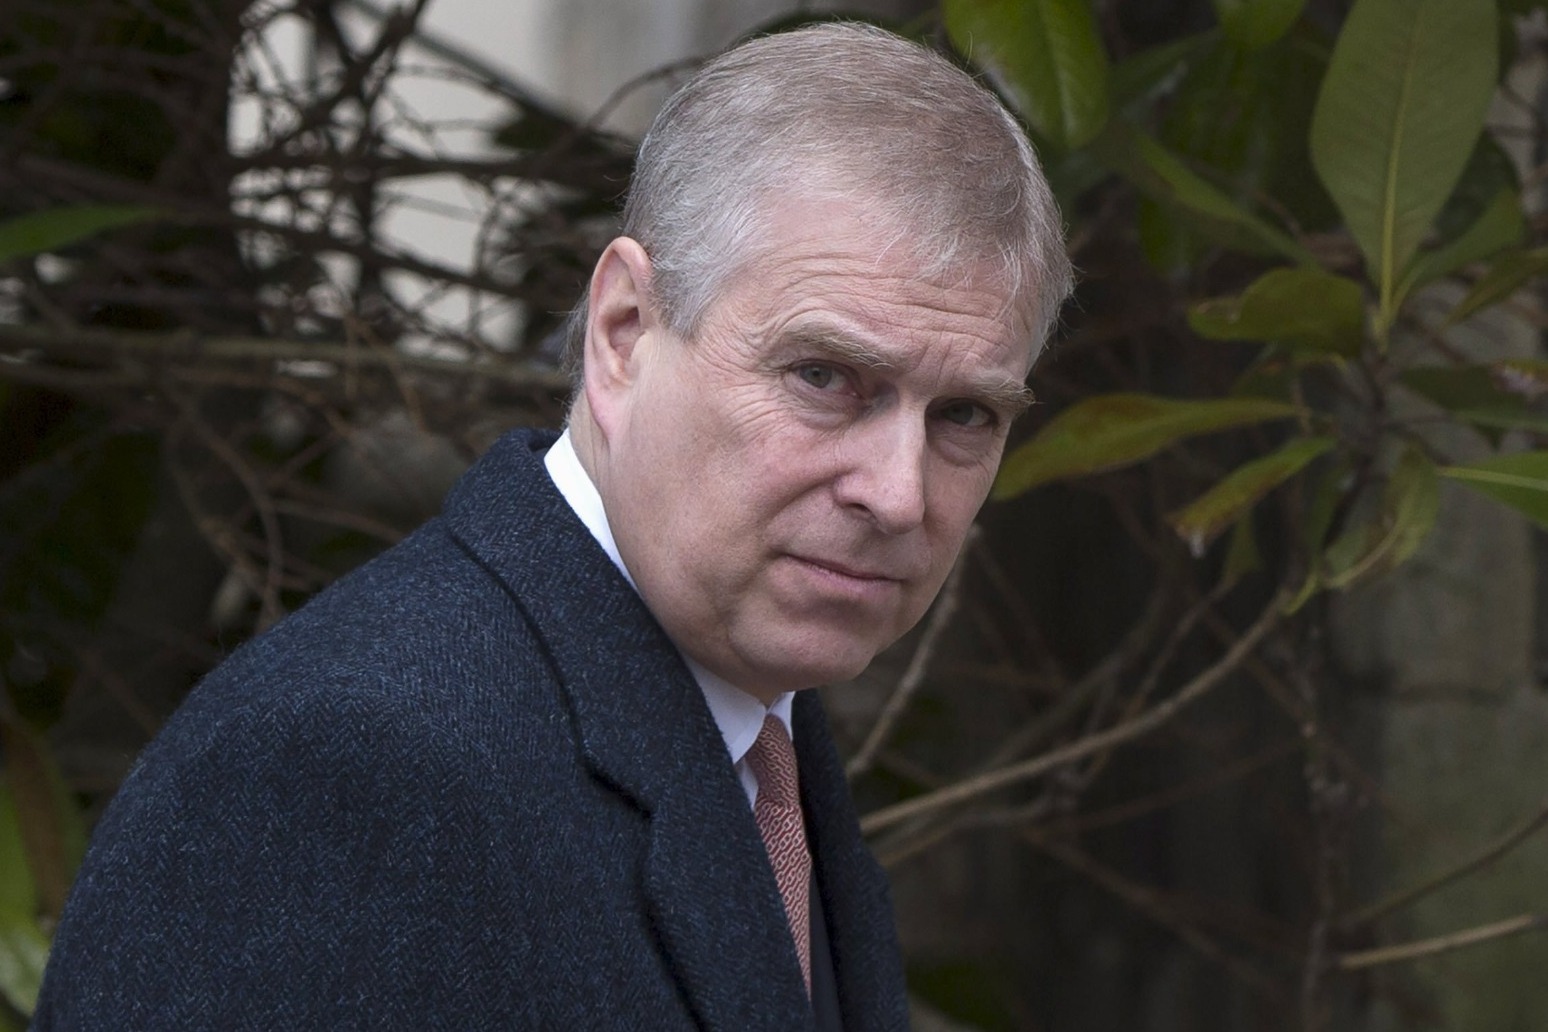 Andrew facing renewed calls to lose dukedom after settling sex case